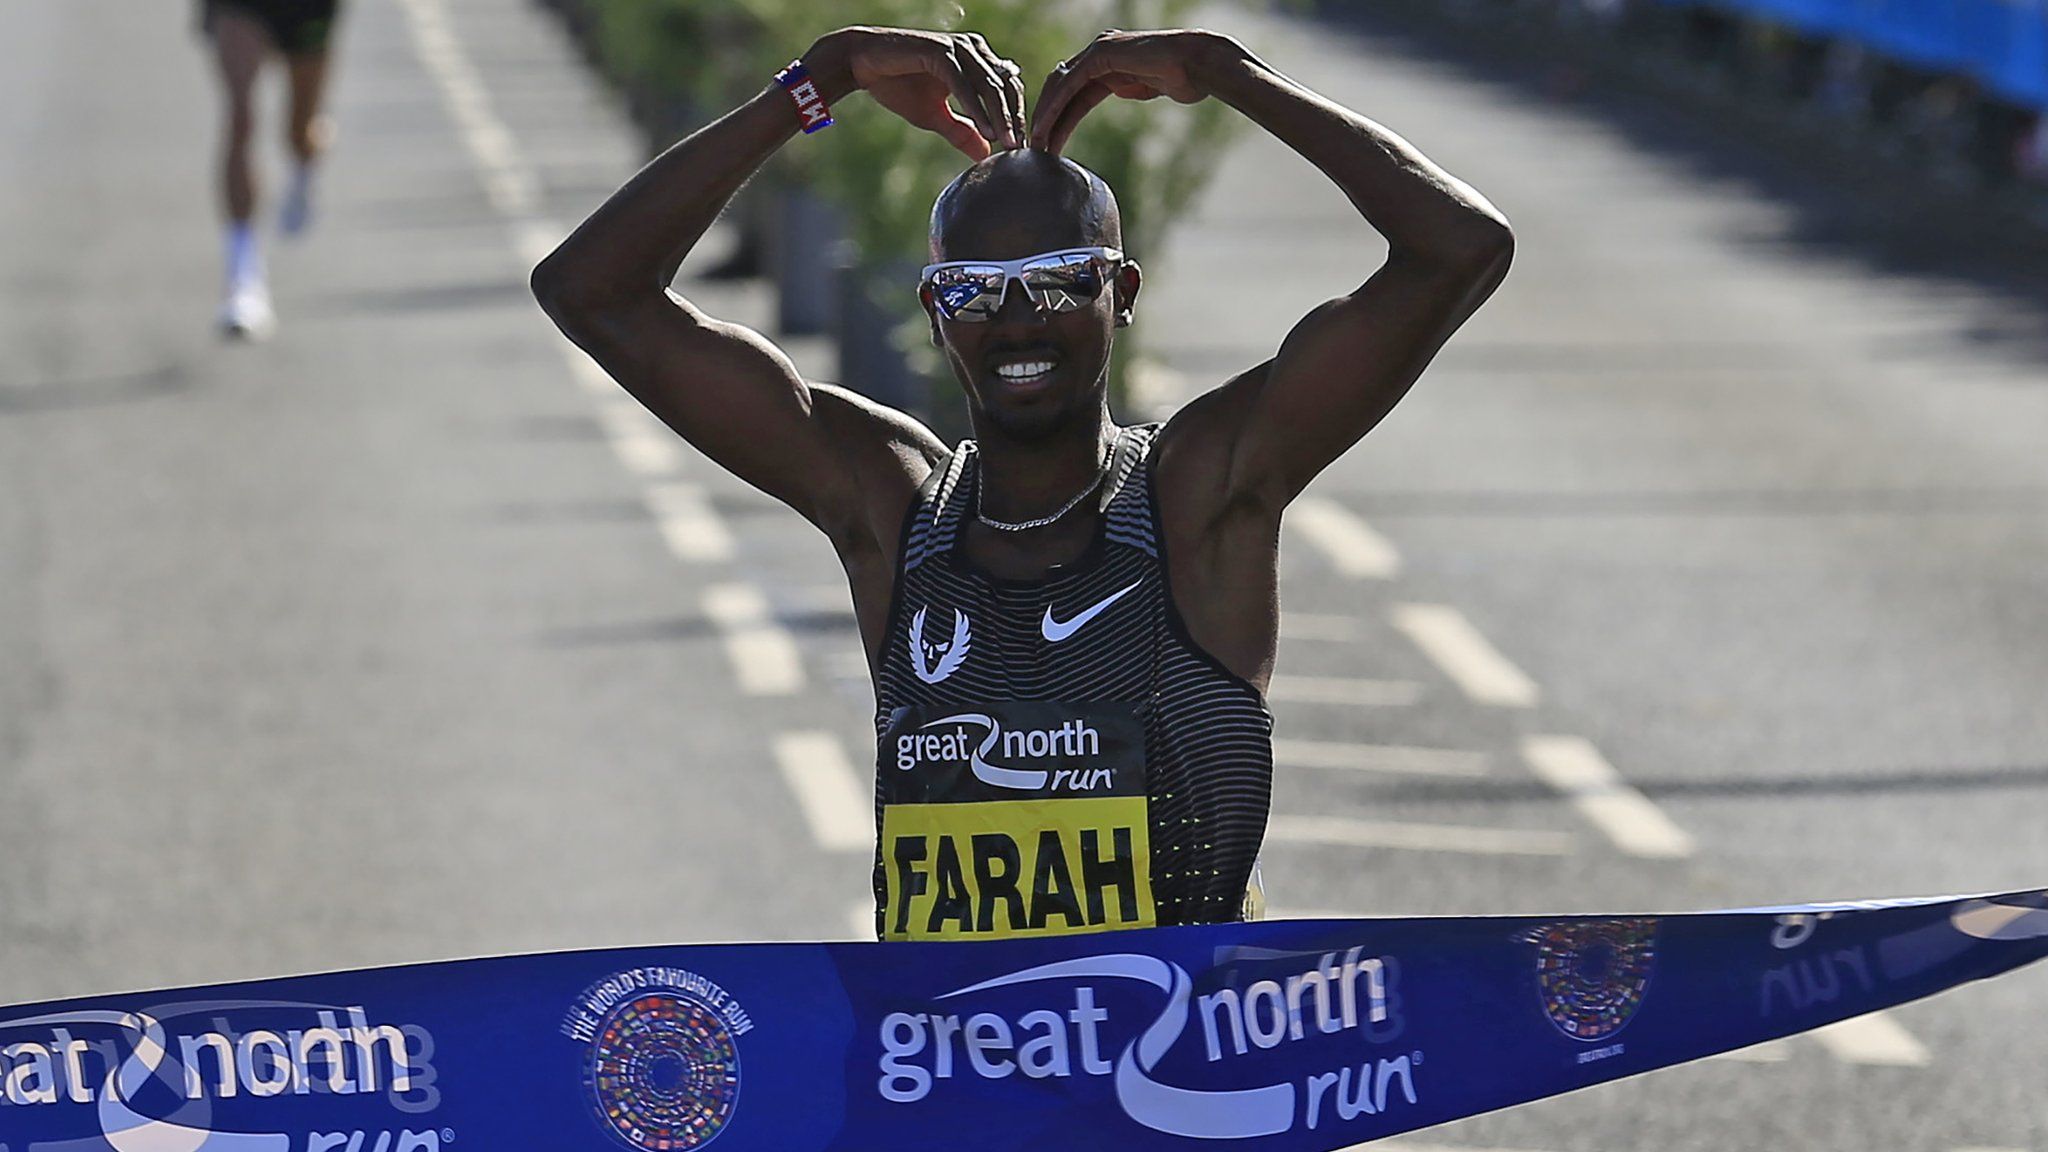 Great North Run 2017: Mo Farah wins race for fourth time - BBC News